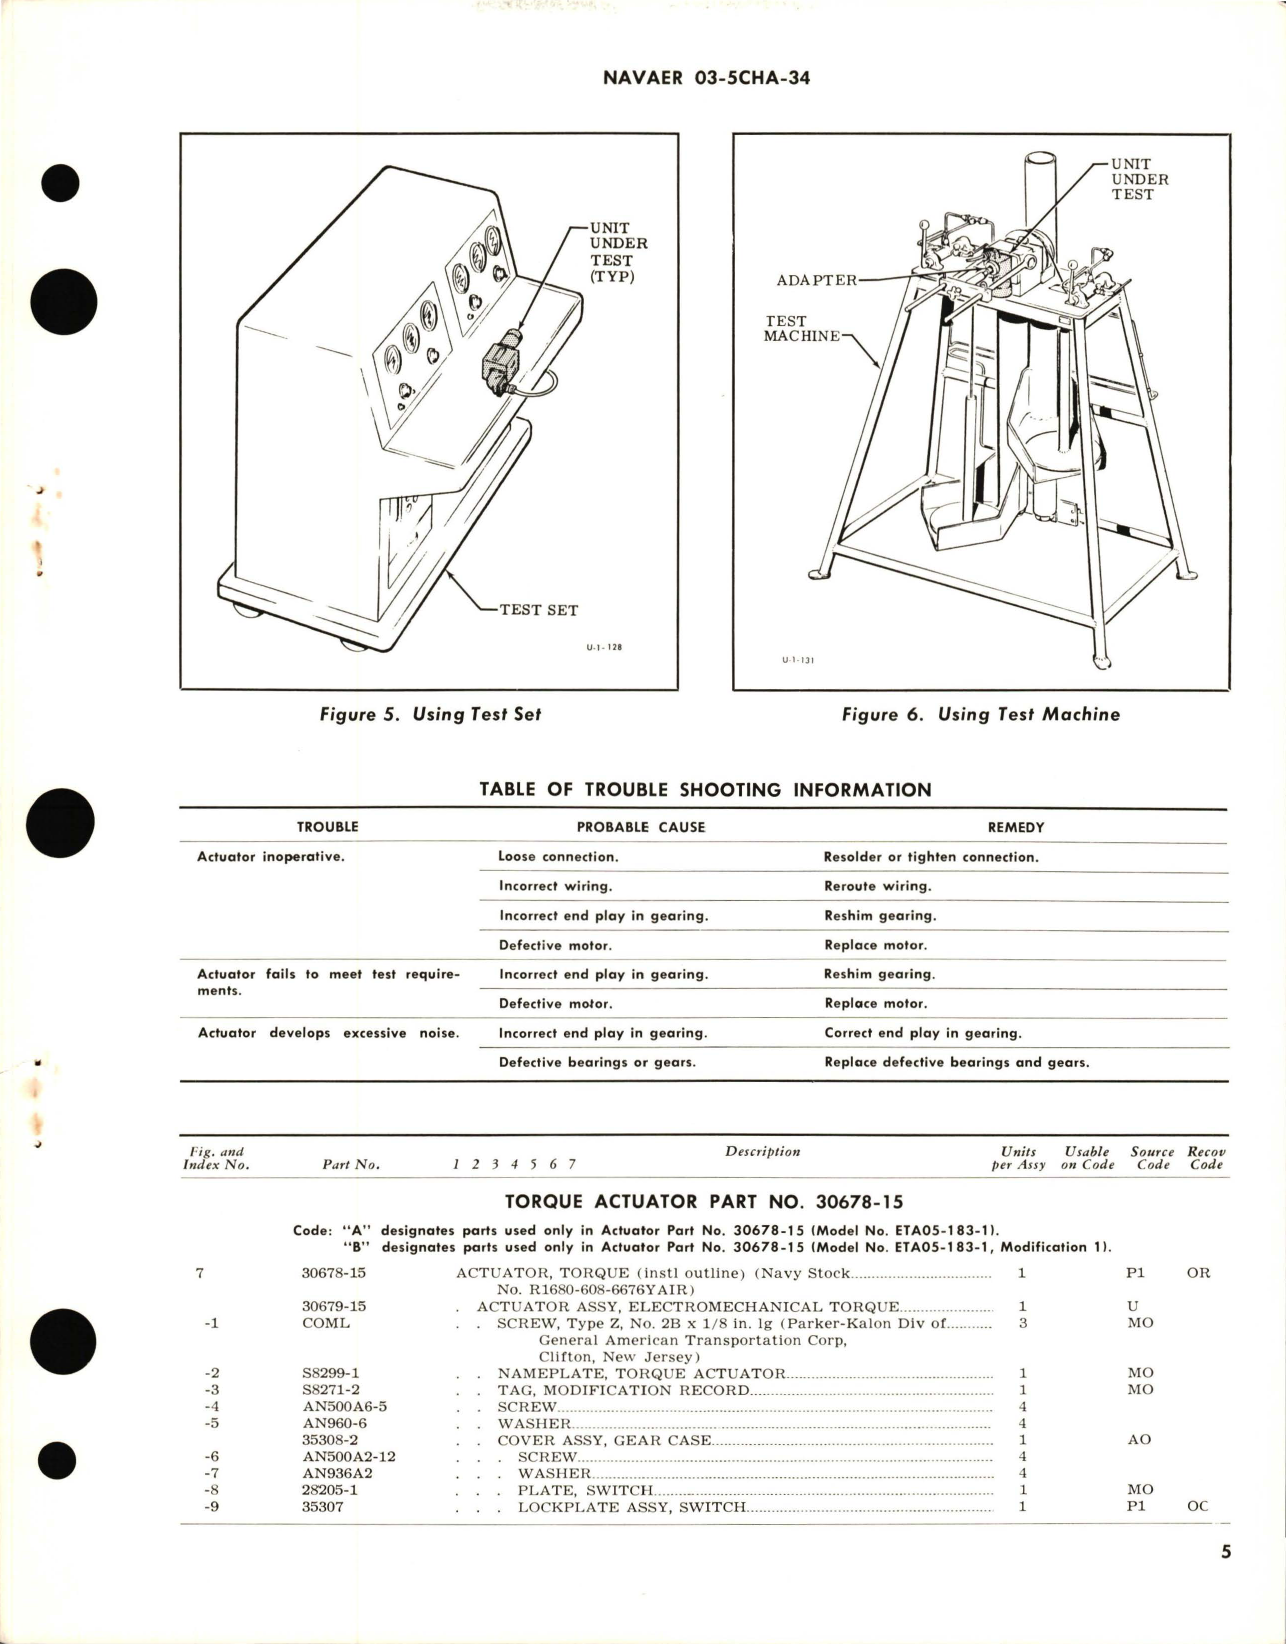 Sample page 5 from AirCorps Library document: Overhaul Instructions with Parts Breakdown for Torque Actuator - Part 30678-15 